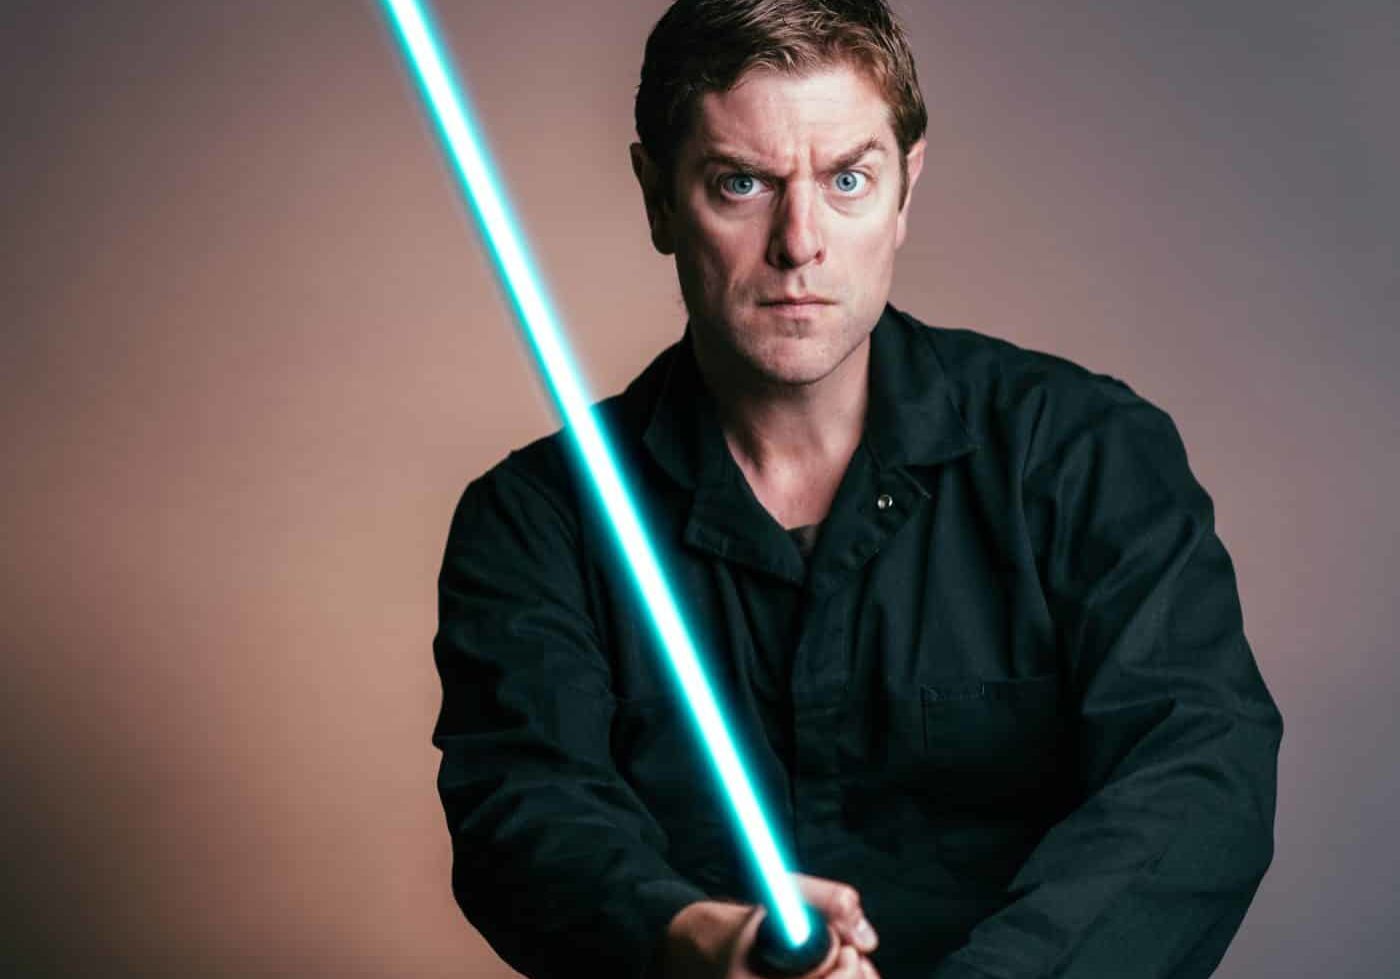 Photo of Charles Ross holding a light saber